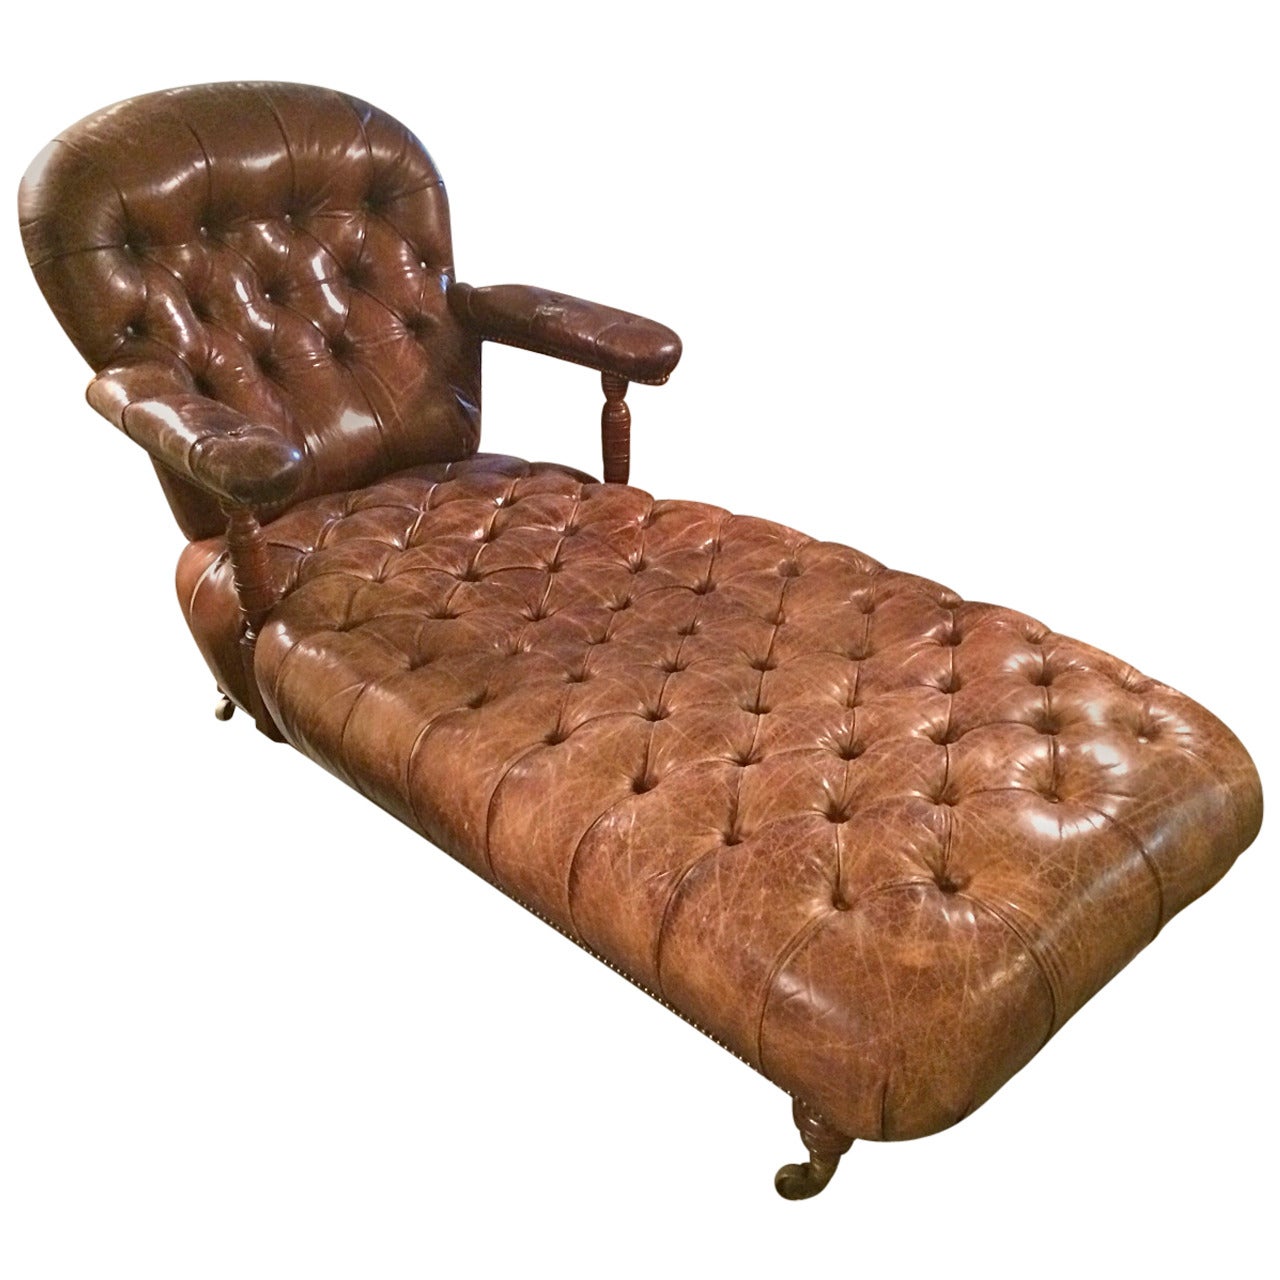 Rare Aristocratic English Leather Button Tufted Chaise Longue